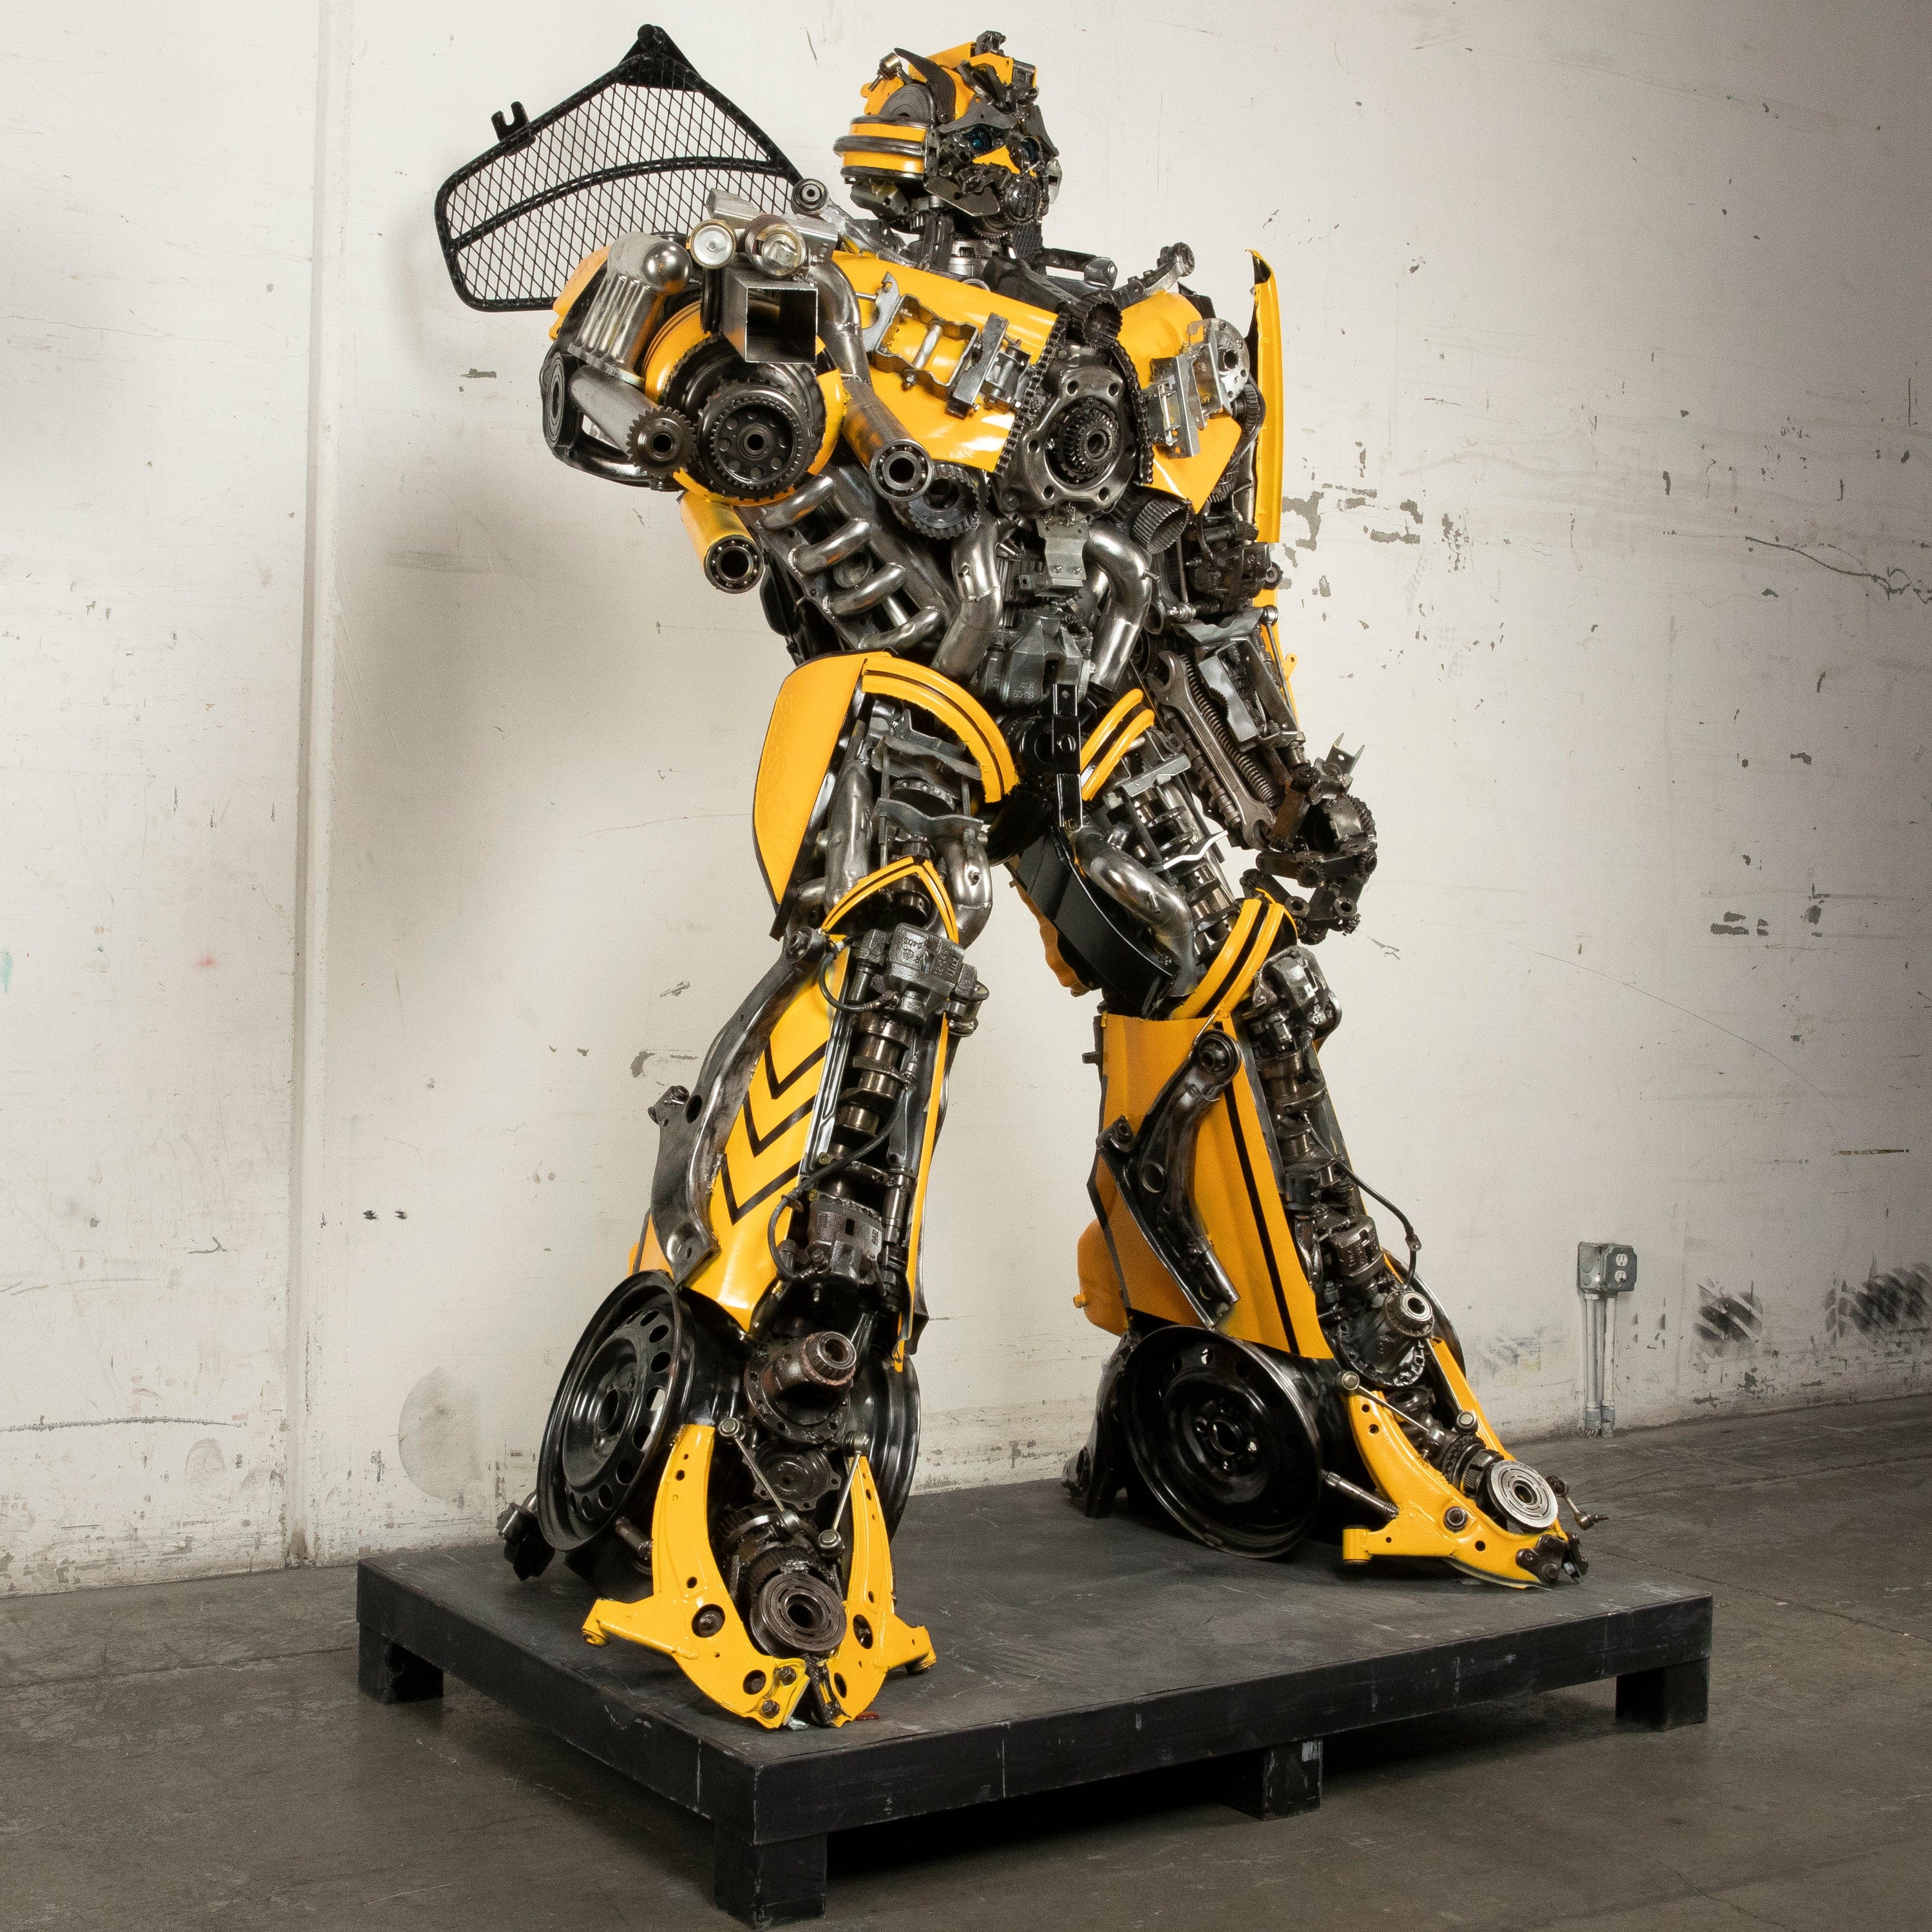 Kalifano Recycled Metal Art 91" Bumblebee Inspired Recycled Metal Art Sculpture RMS-BB230-S29